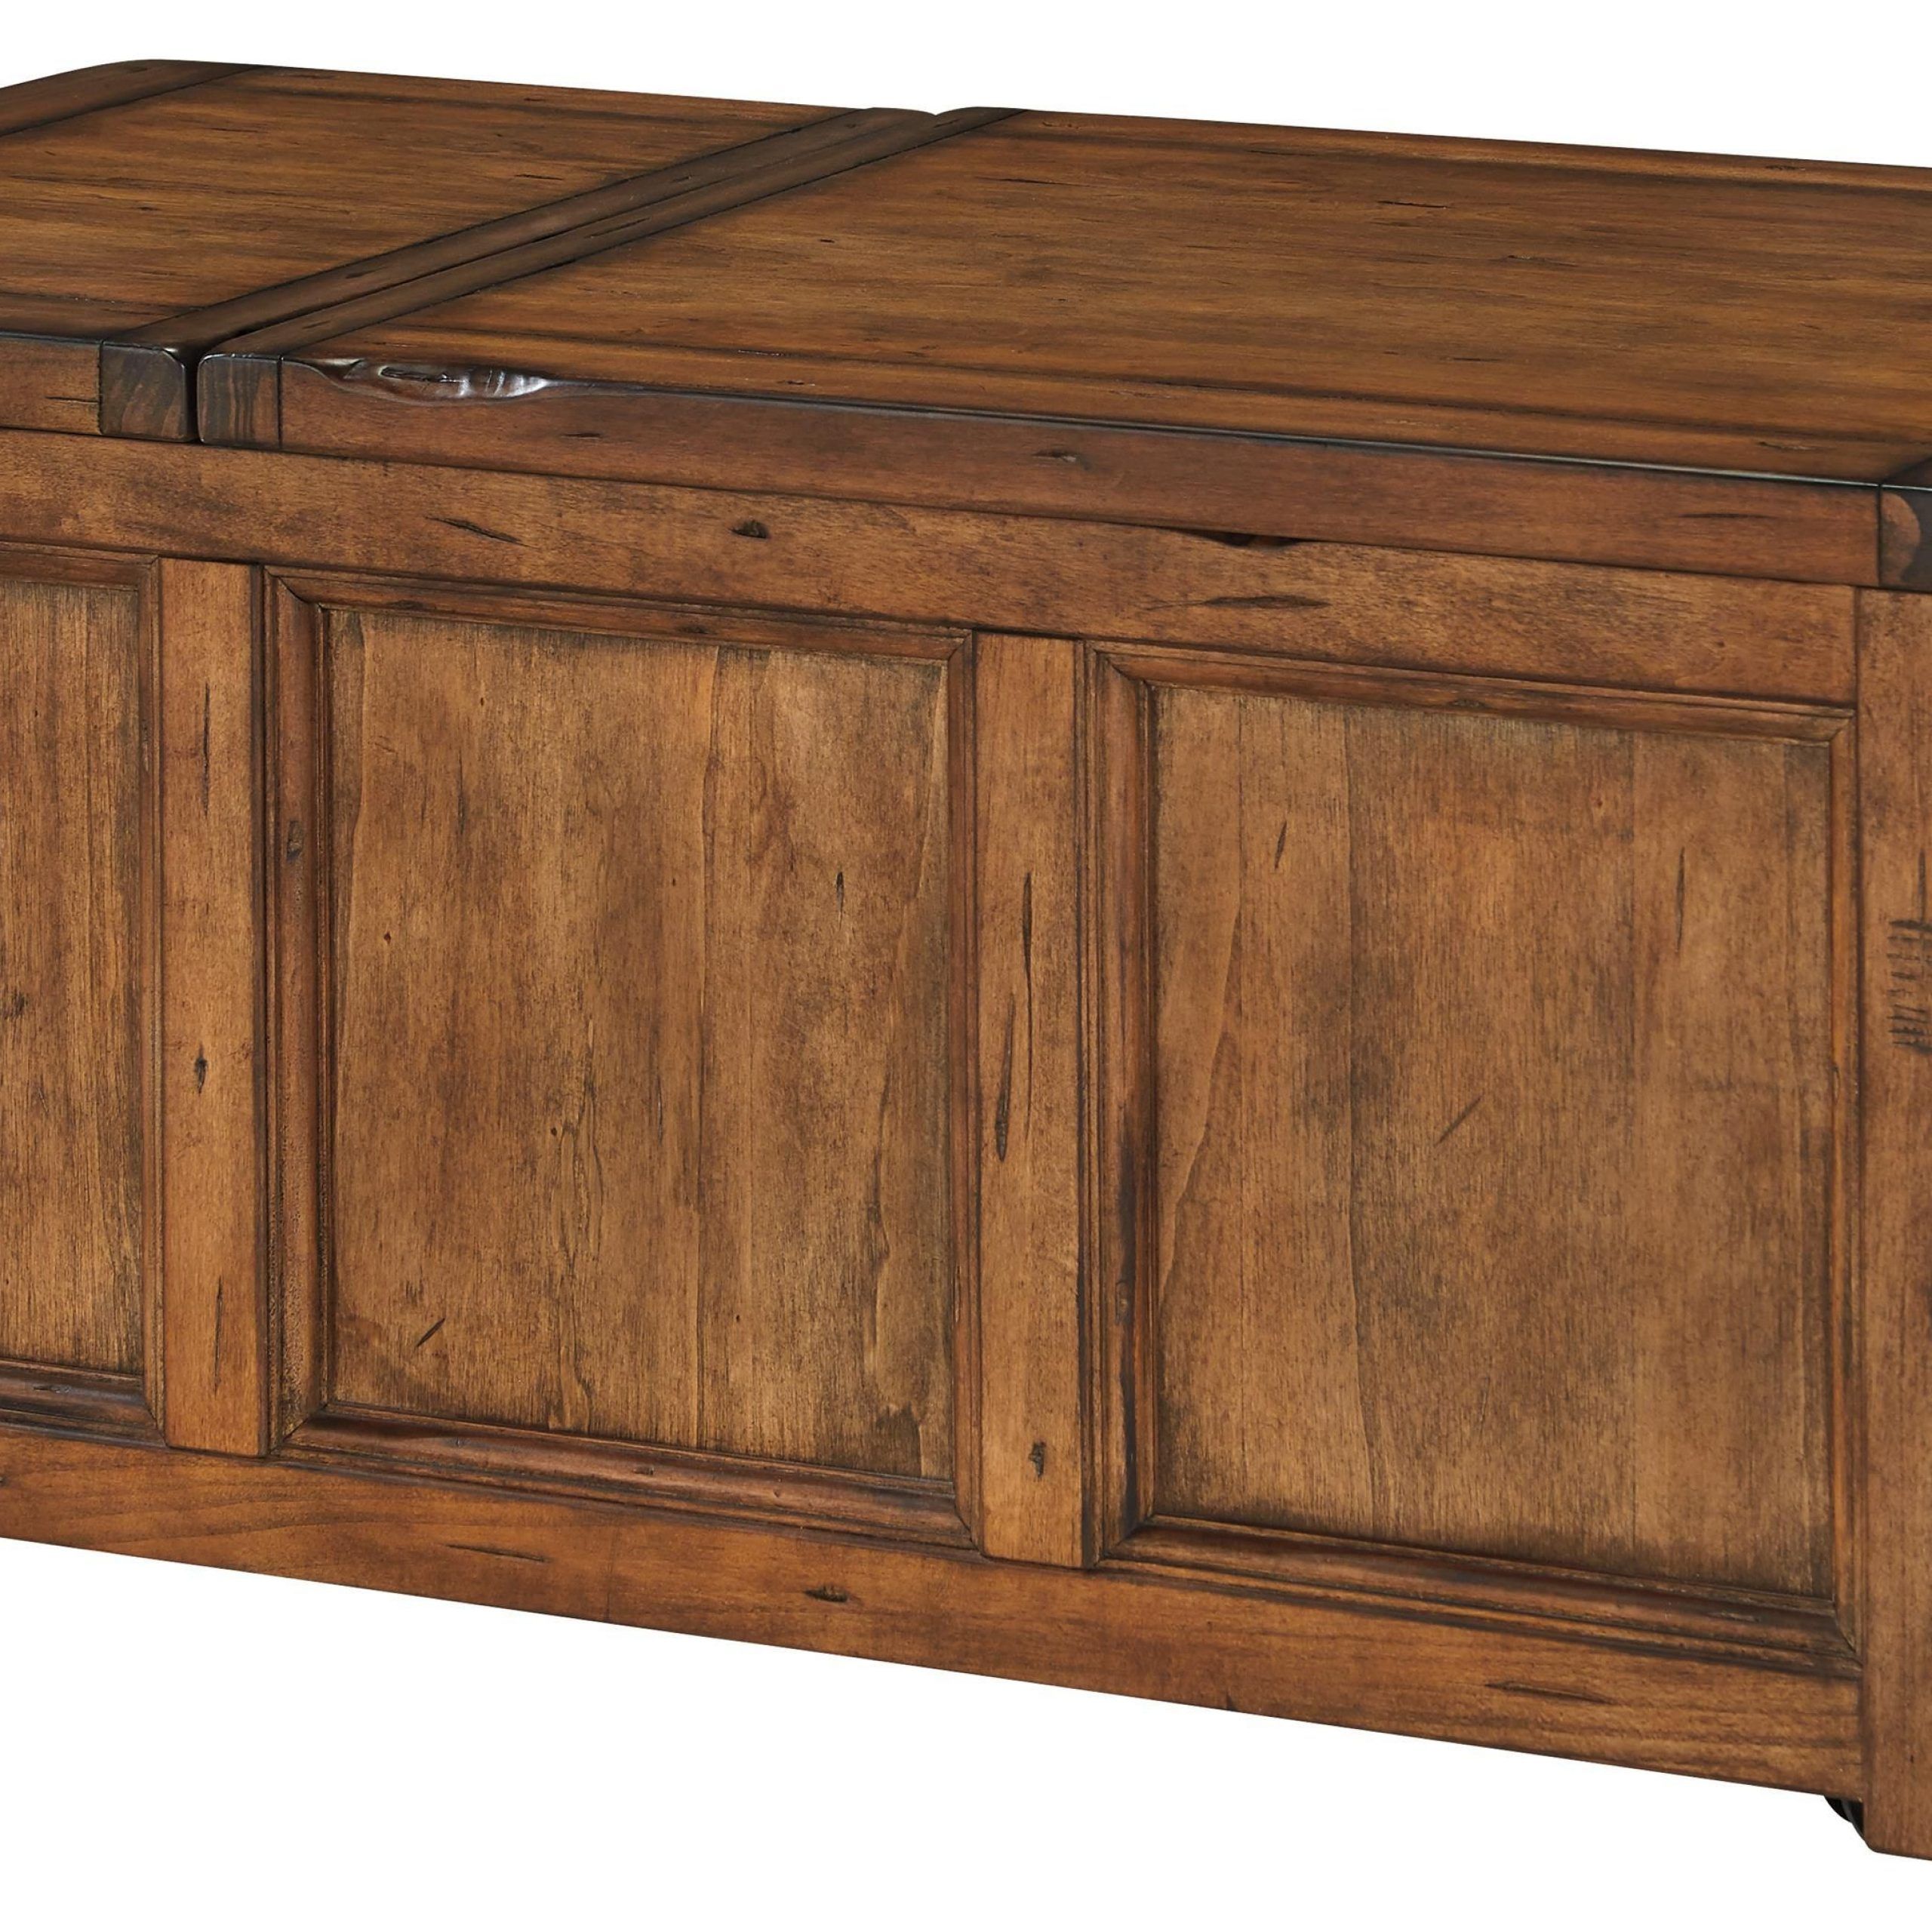 Tamonie Rustic Trunk Style Rectangular Lift Top Cocktail Inside Favorite Walnut Wood Storage Trunk Cocktail Tables (View 4 of 20)